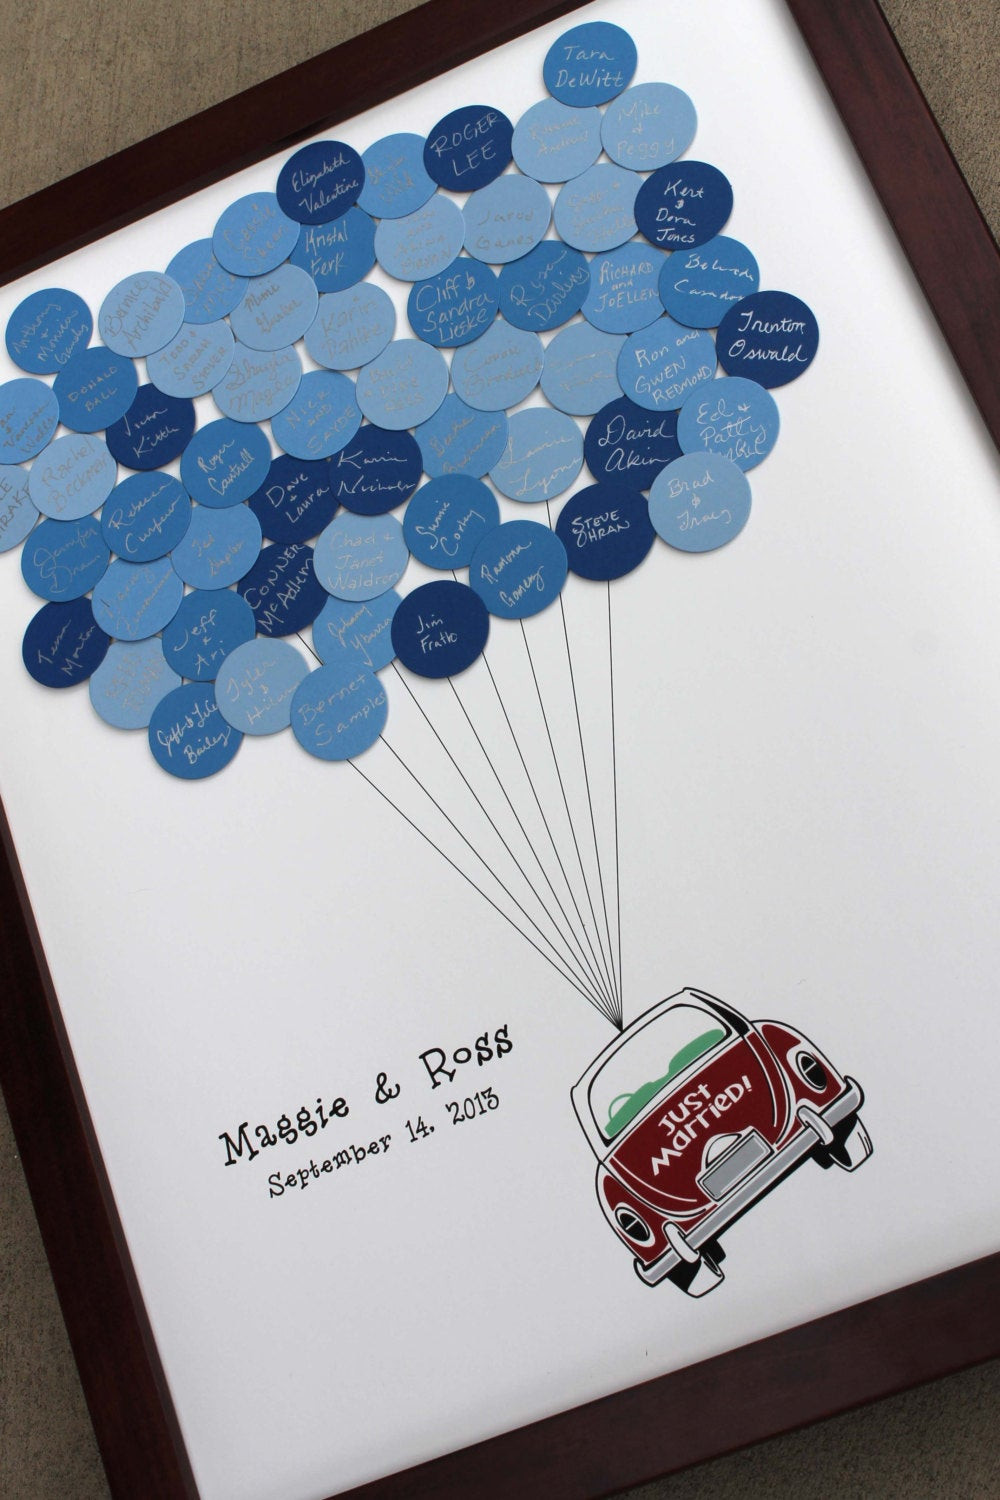 Wedding Guest Book Balloons
 Wedding Guest Book Just Married Car Balloons for up to 75